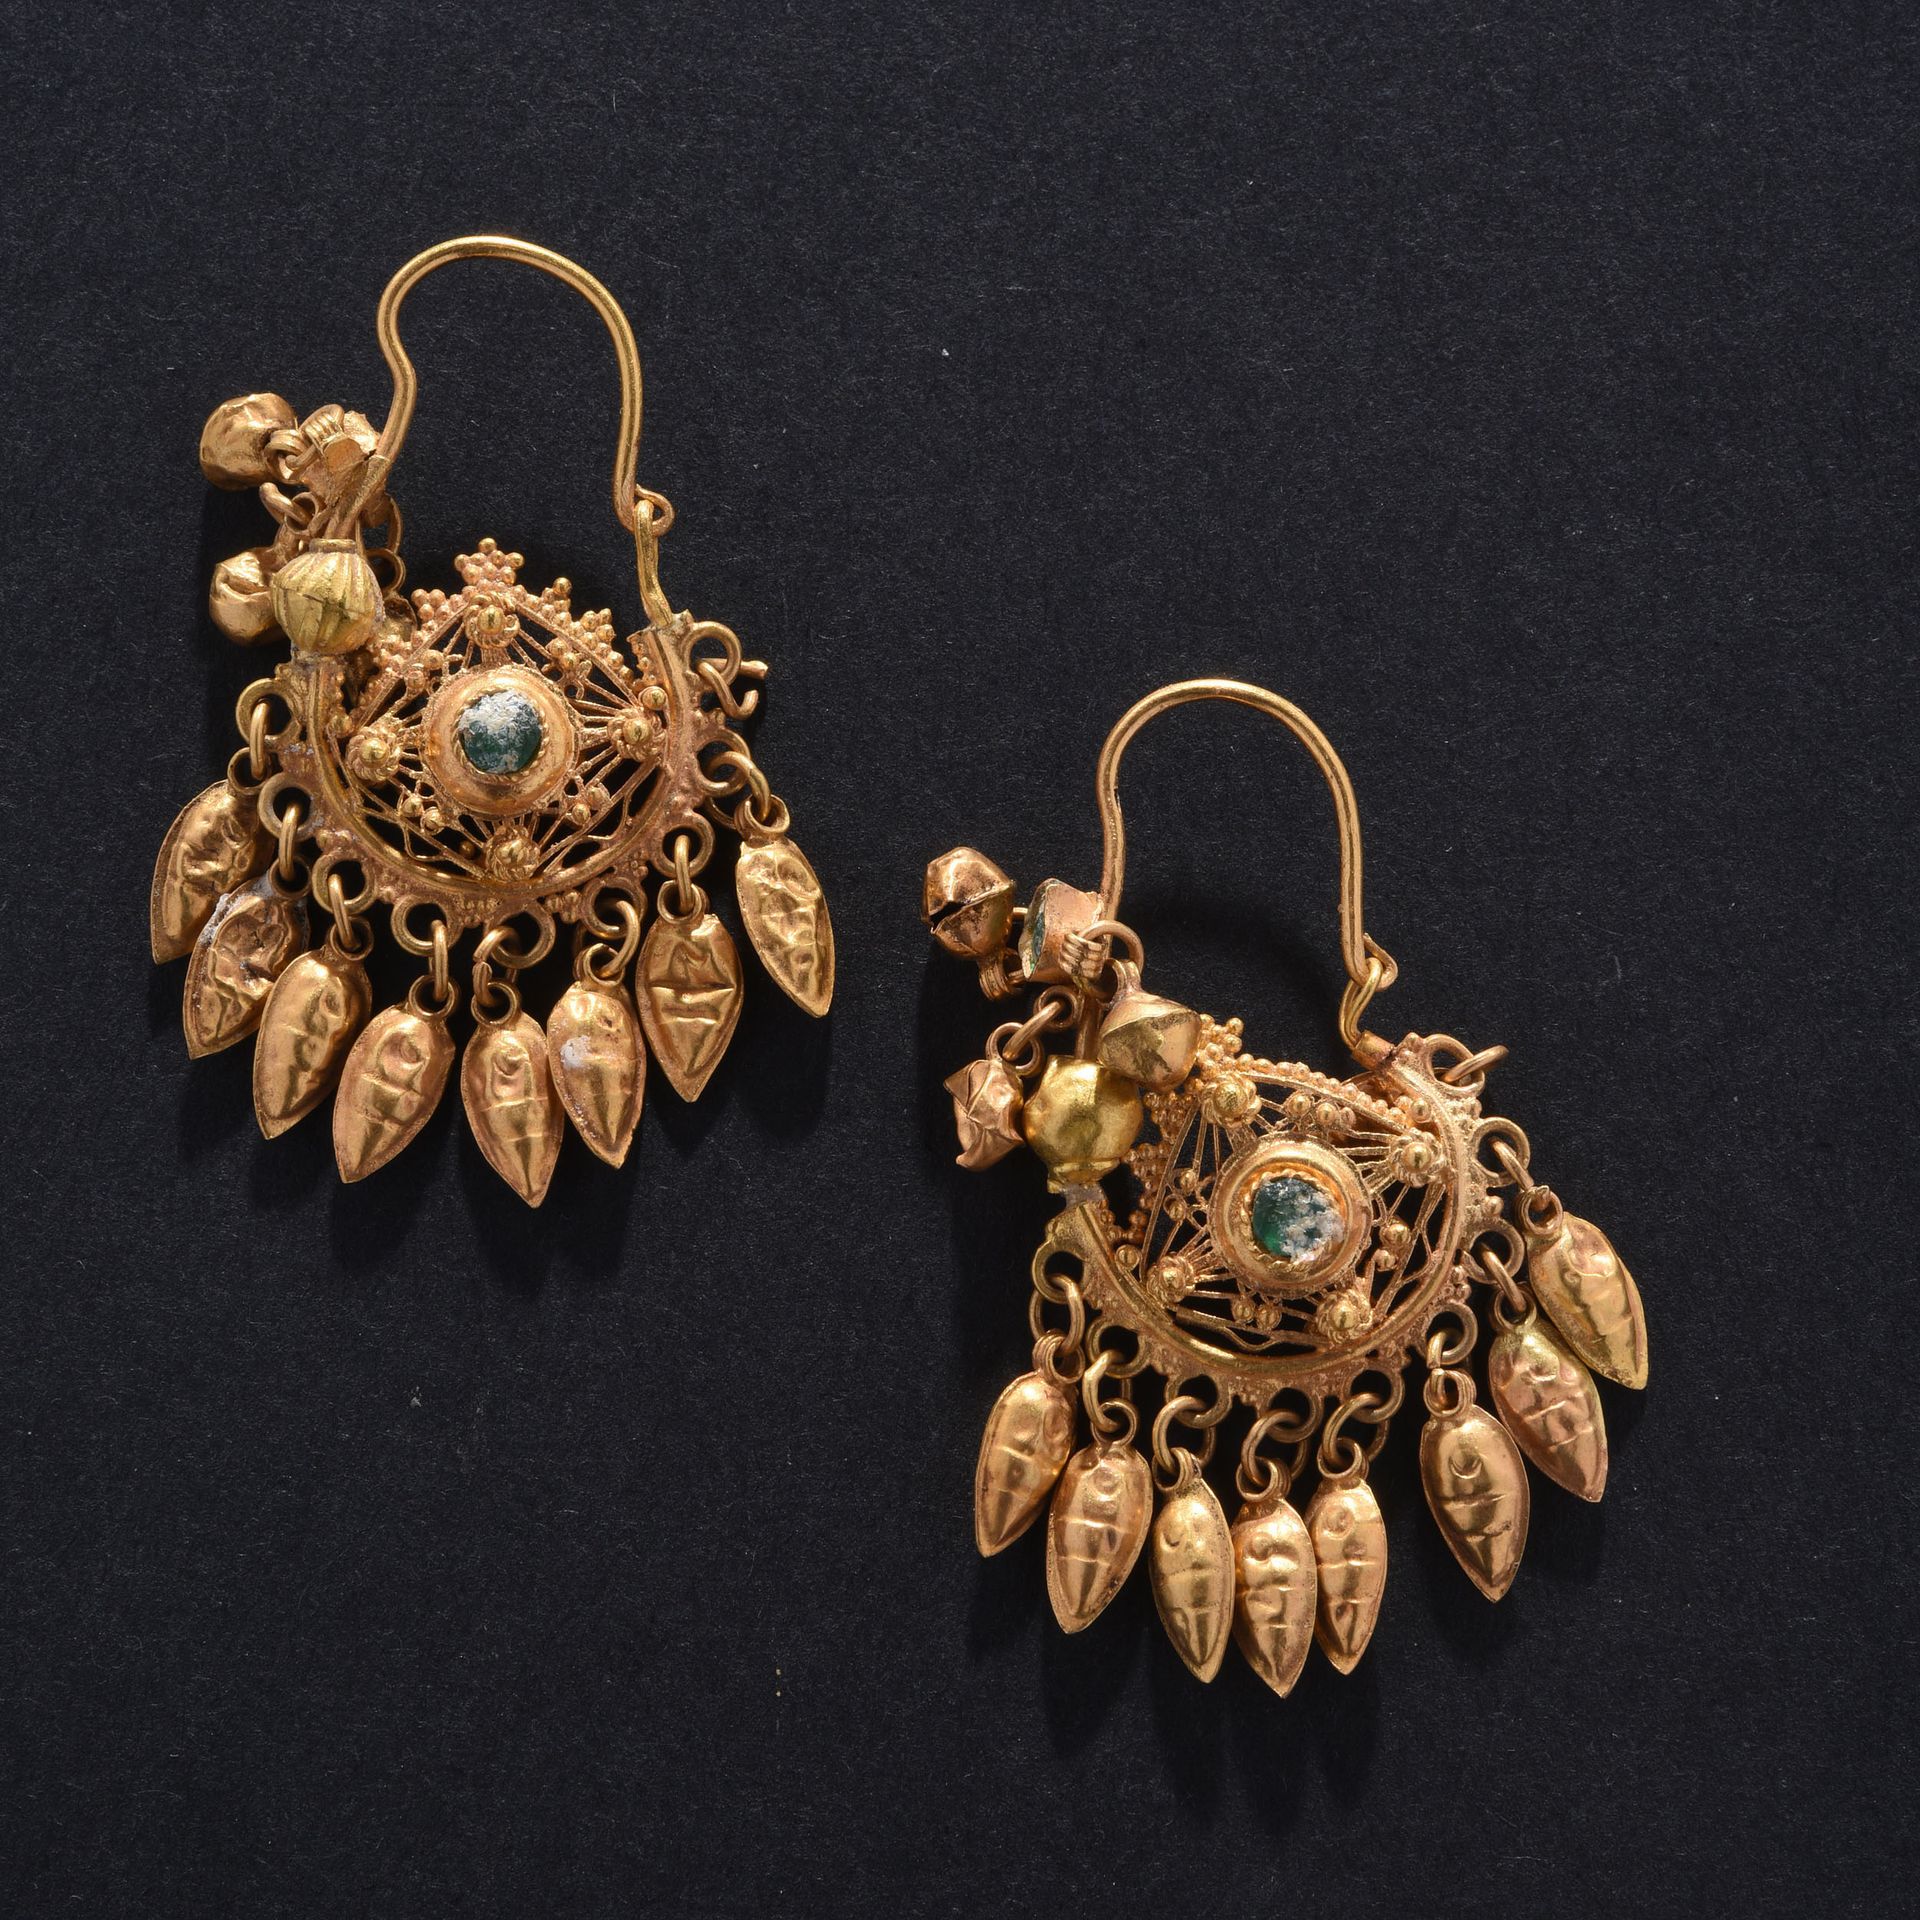 Null PAIR OF EARRINGS WITH PENDANTS

Greece, 4th-3rd century BC

Gold and glass &hellip;